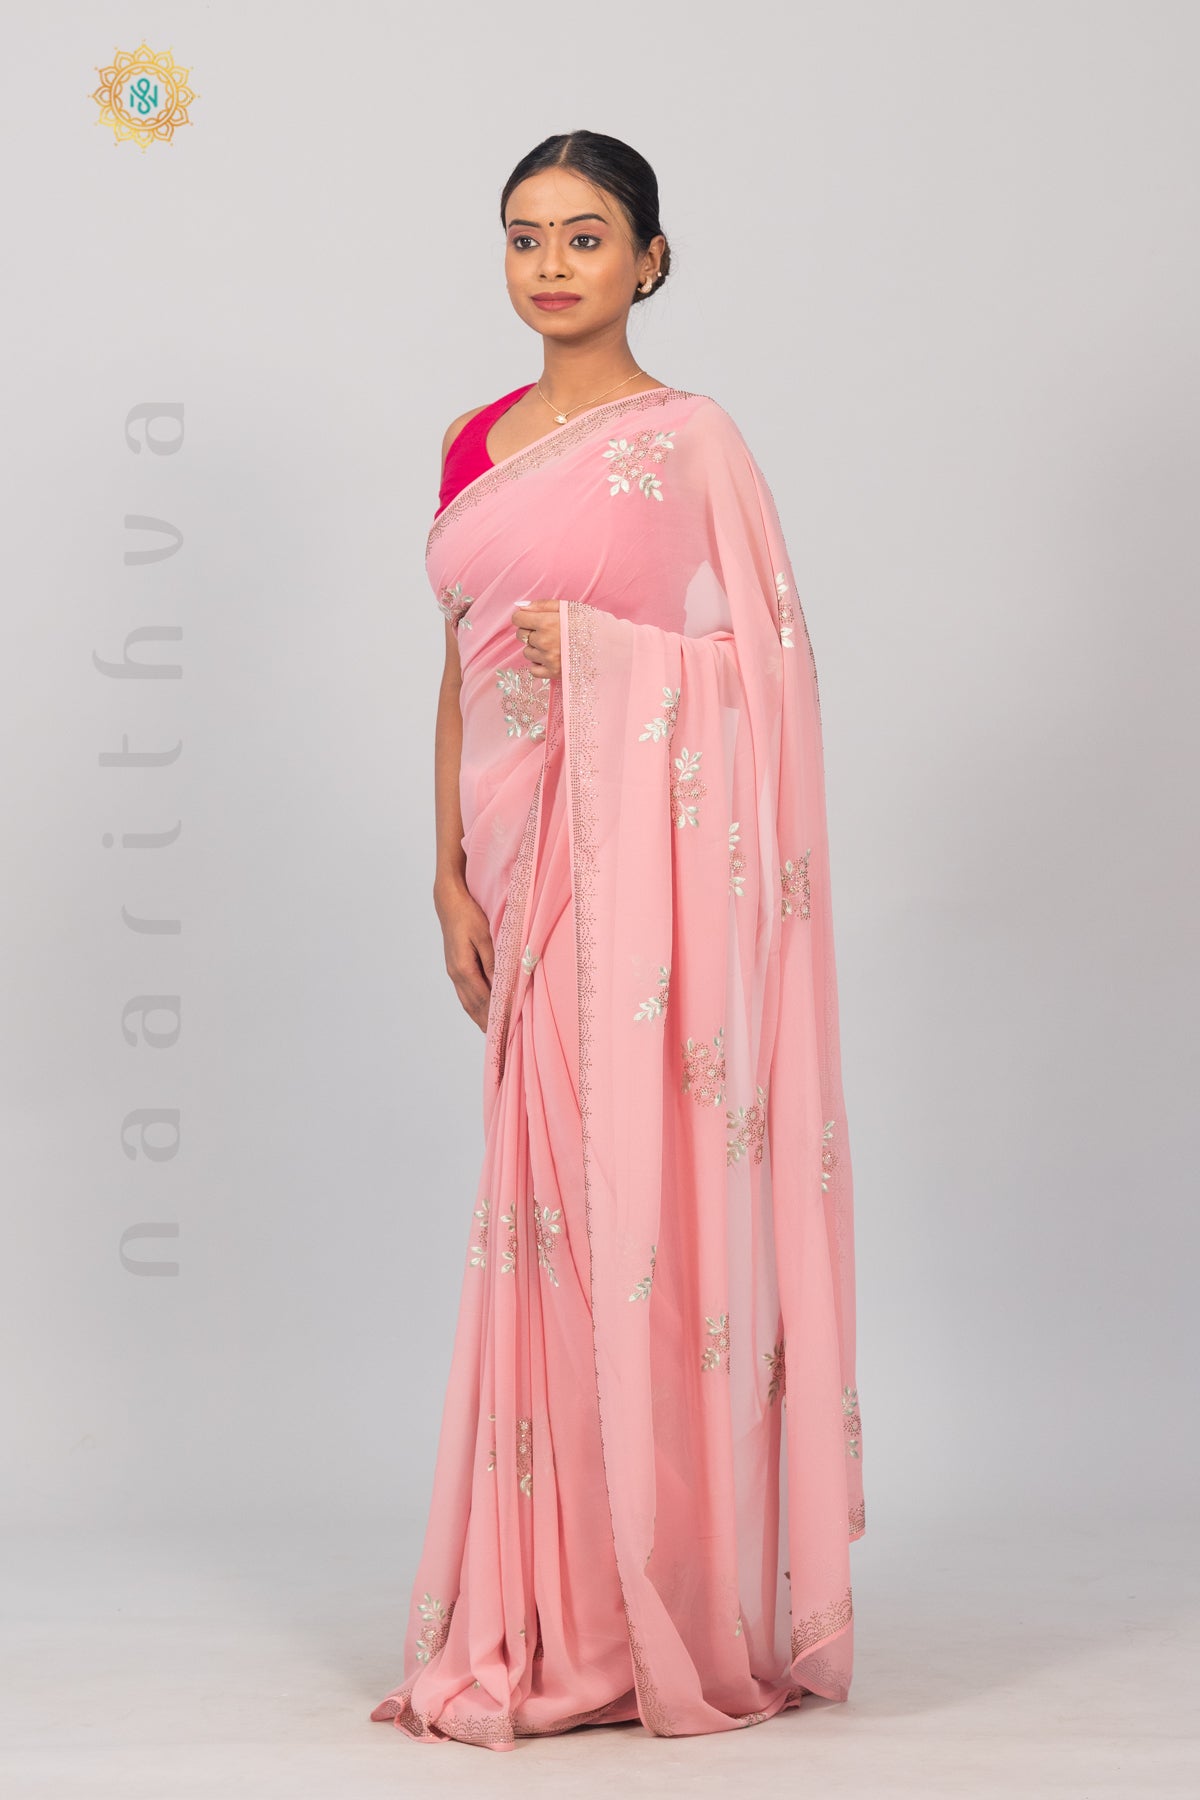 PINK - DESIGNER GEORGETTE SAREE WITH STONE WORK & EMBROIDERY